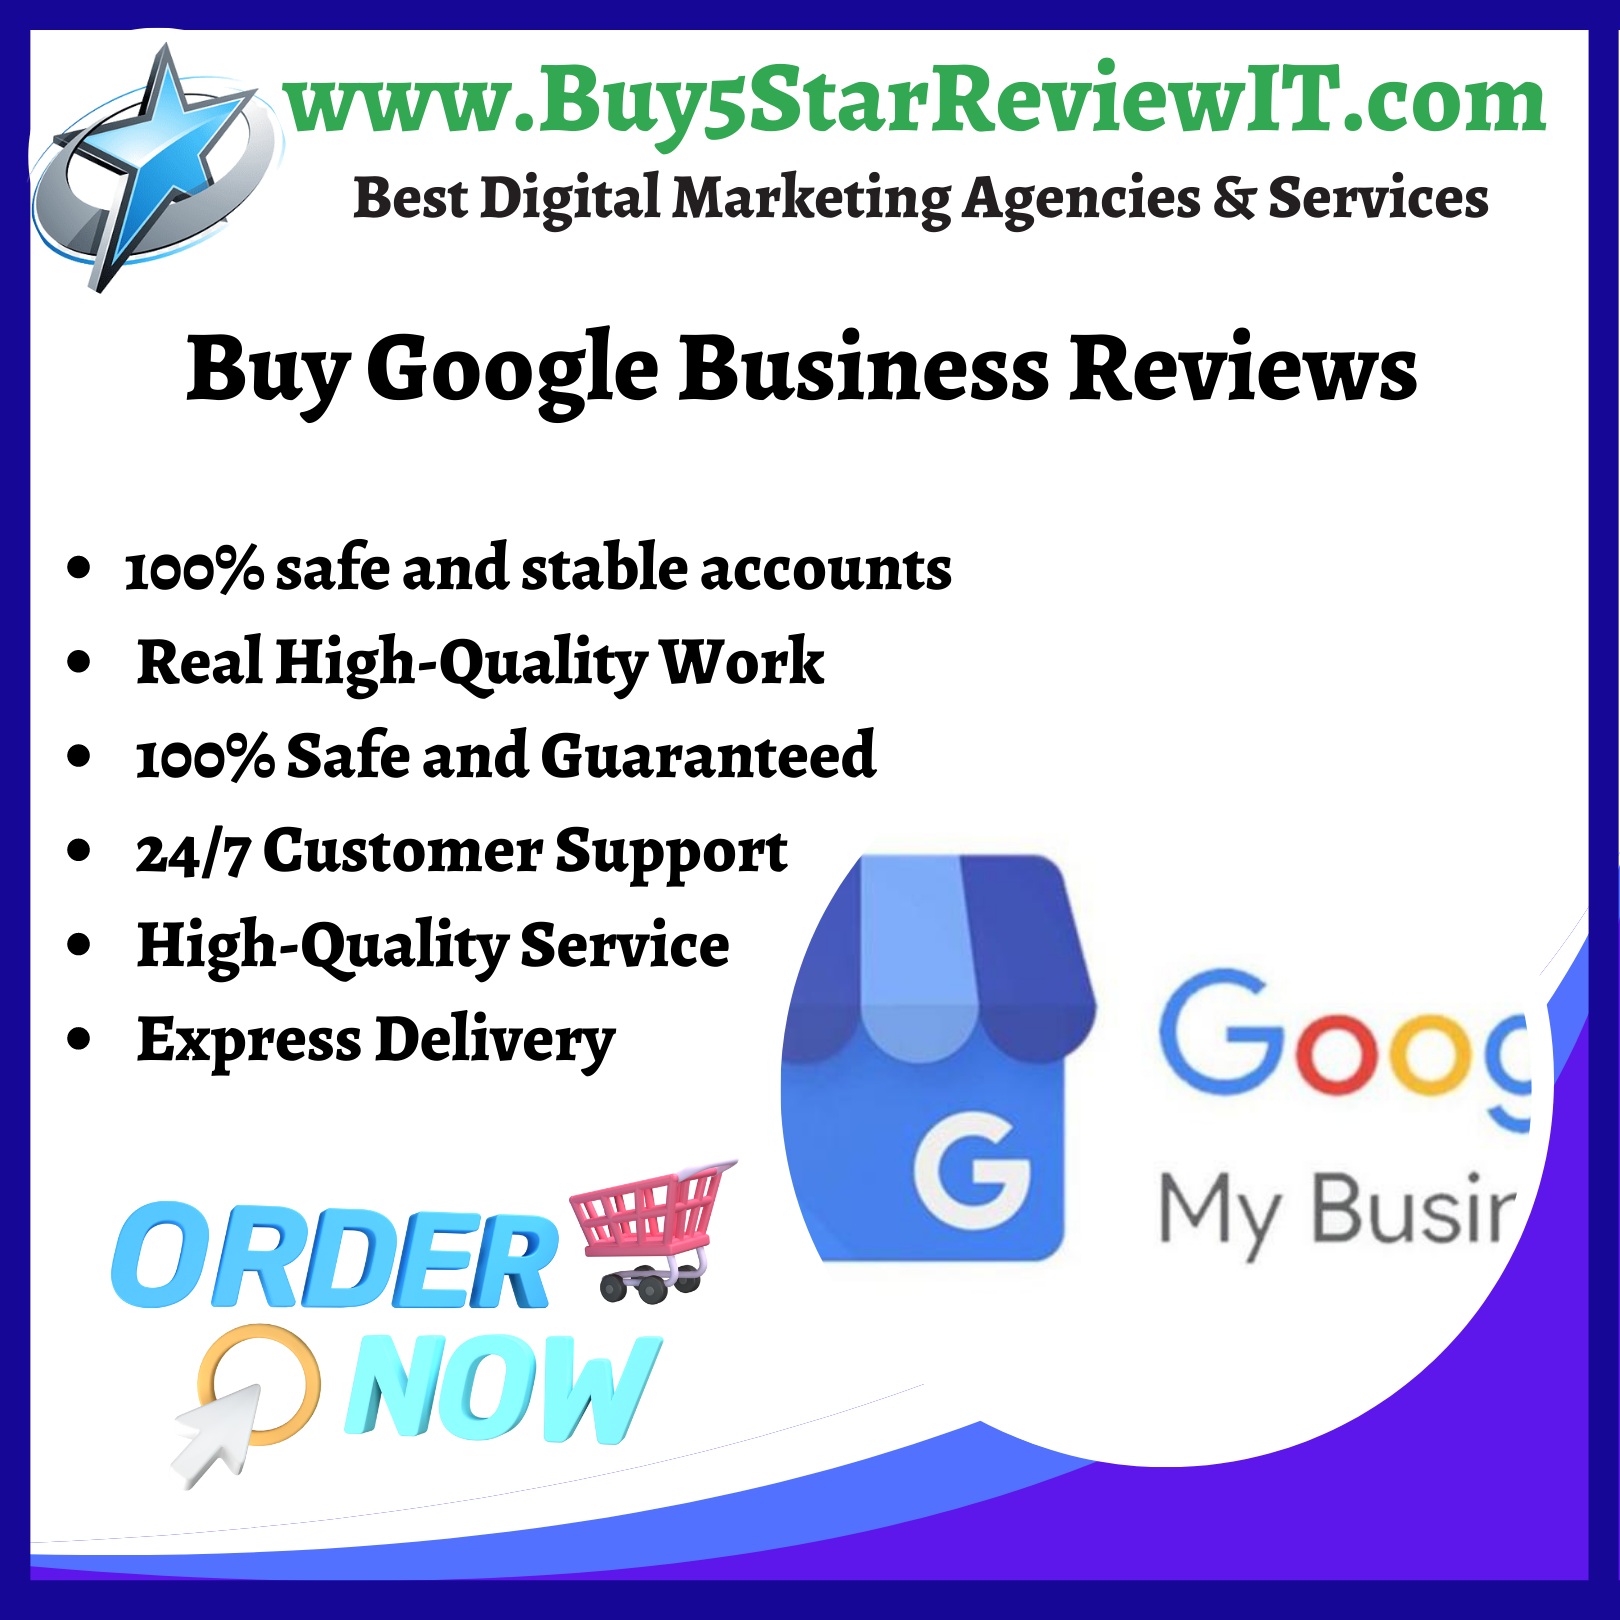 Buy Google Business Reviews - Buy 5 Star Review IT